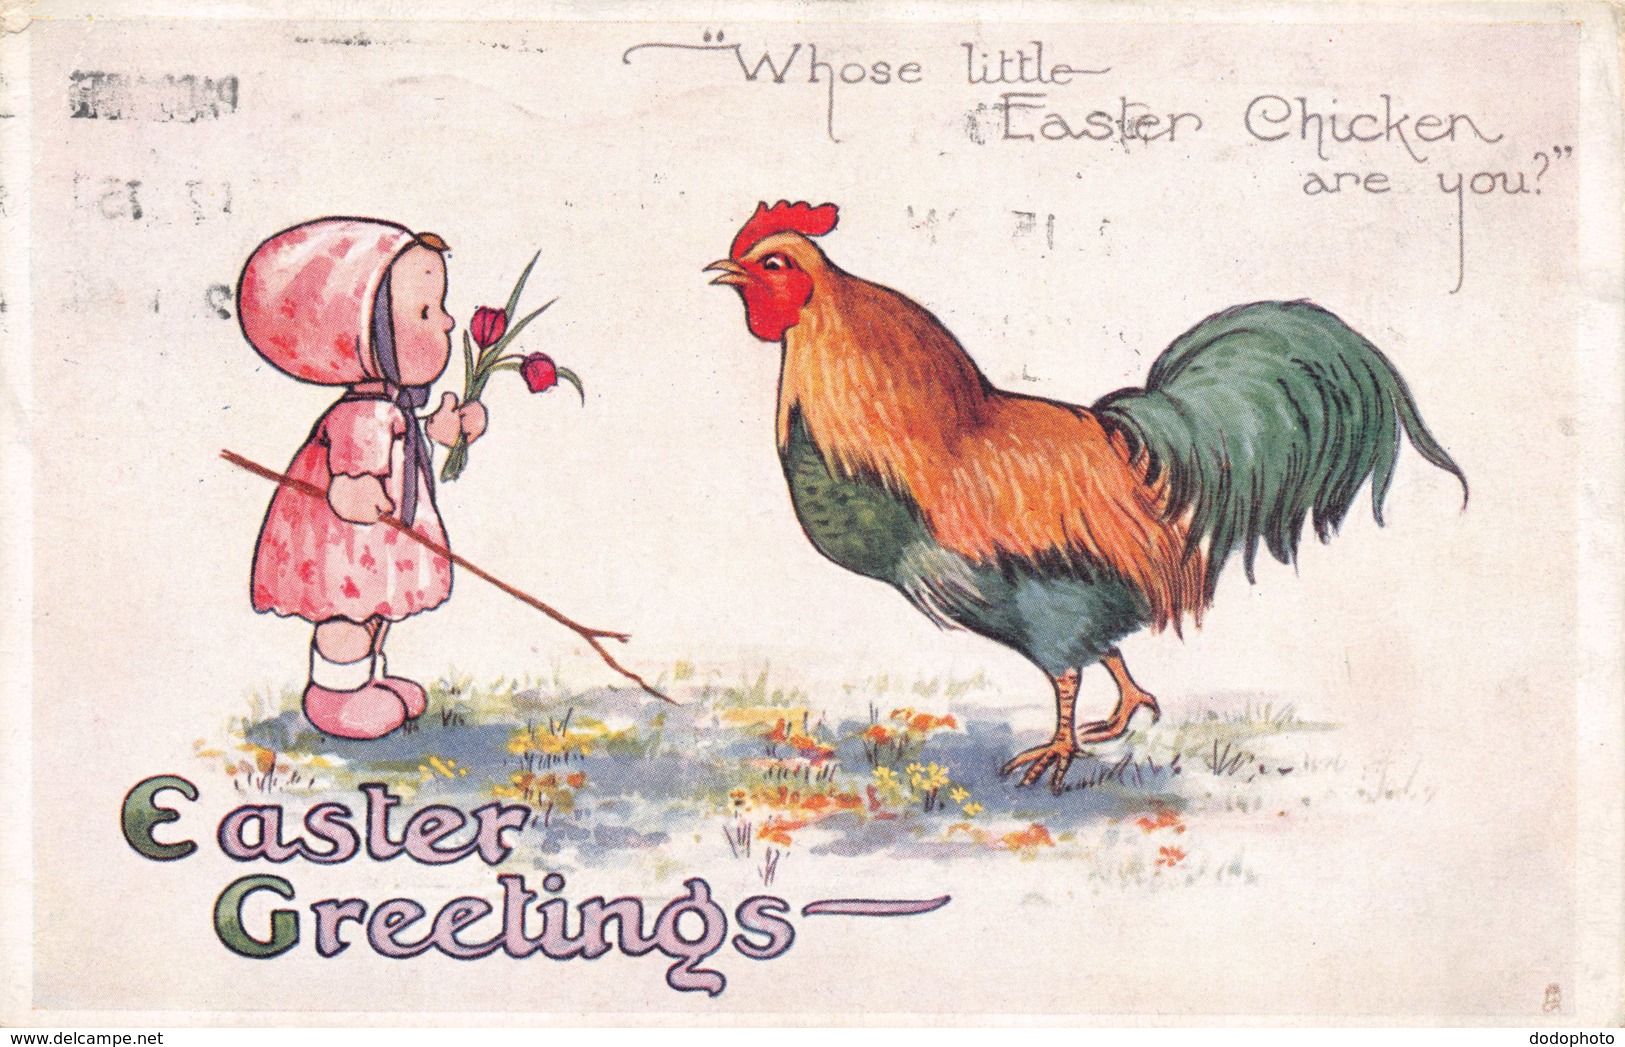 R104862 Easter Greetings. Whose Little Easter Chicken Are You. Little Easter Chicks. Oilette. No. E1158. Tuck. 1915 - World